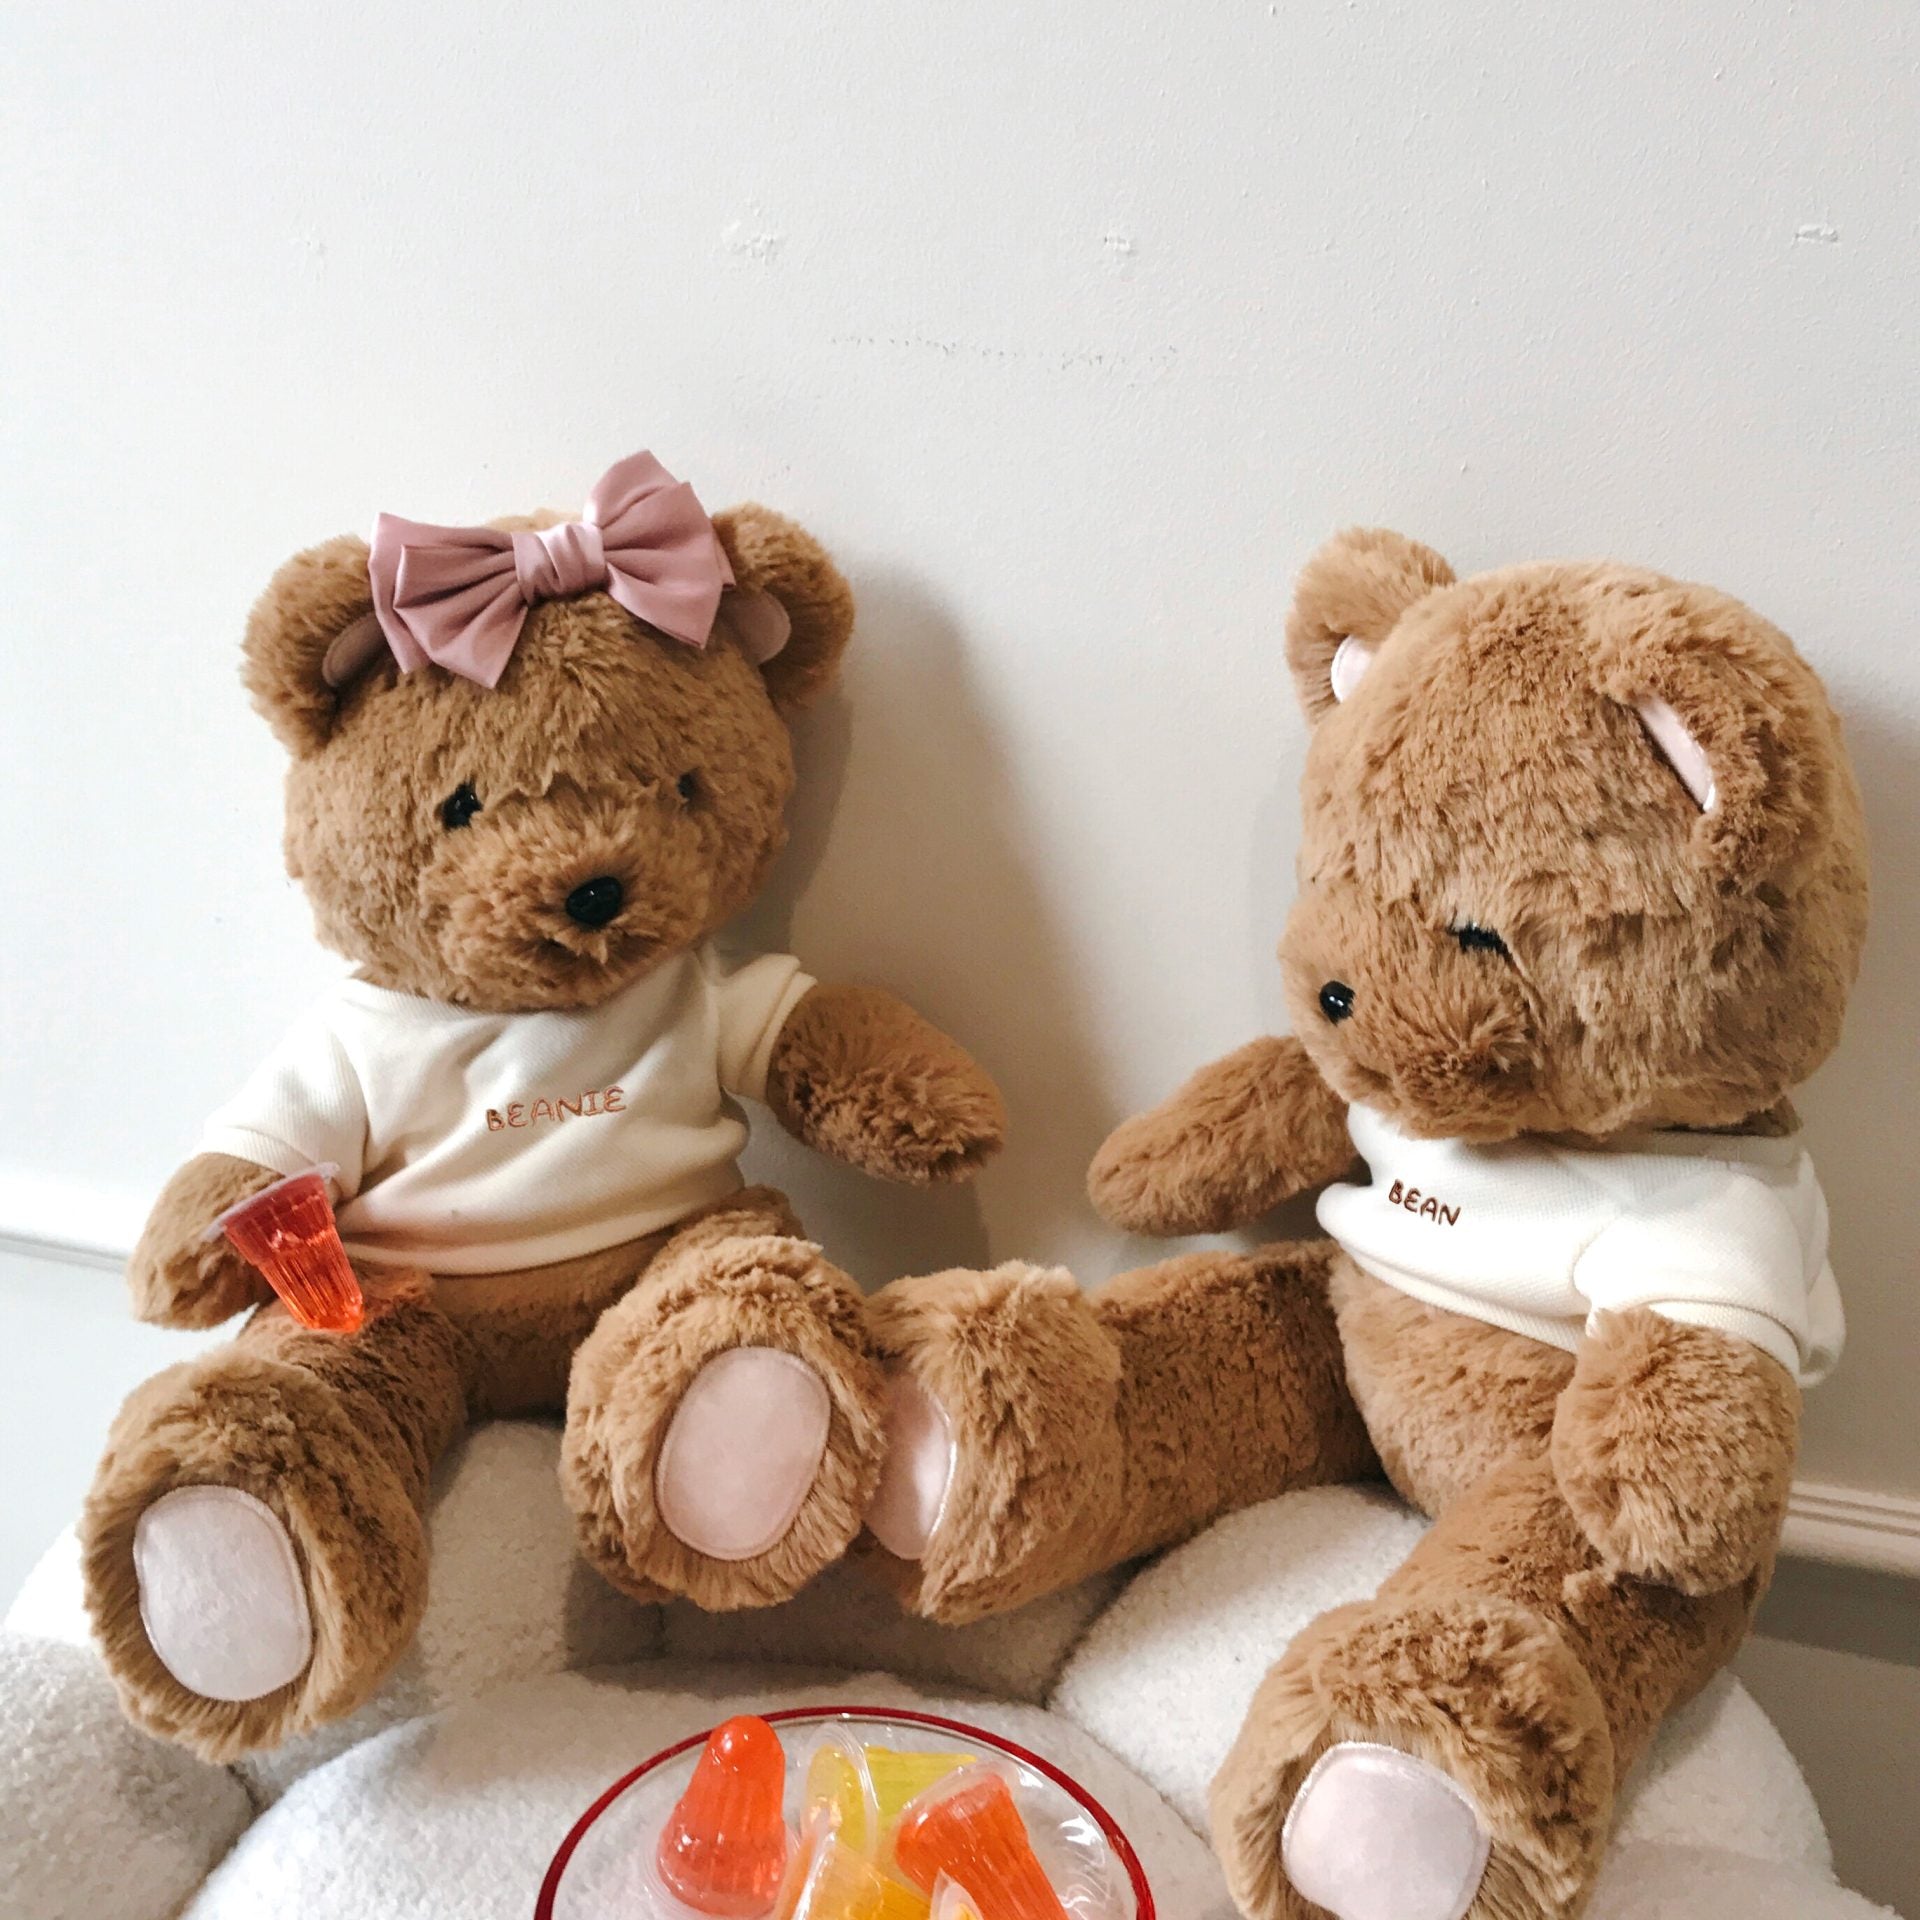 Bean and Beanië Plush Toy Couple Collection